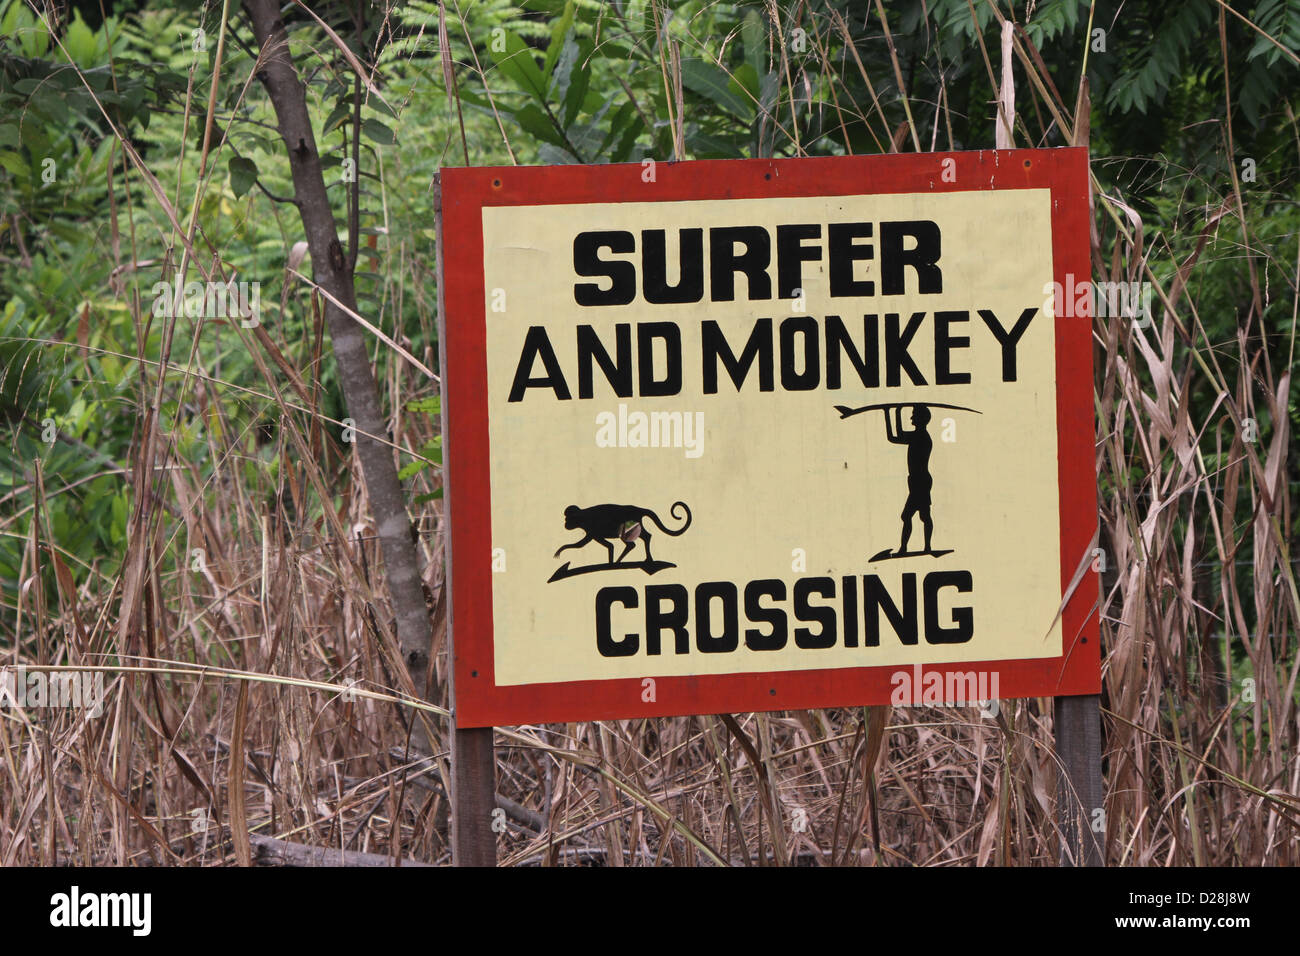 surfer and monkey crossing Stock Photo